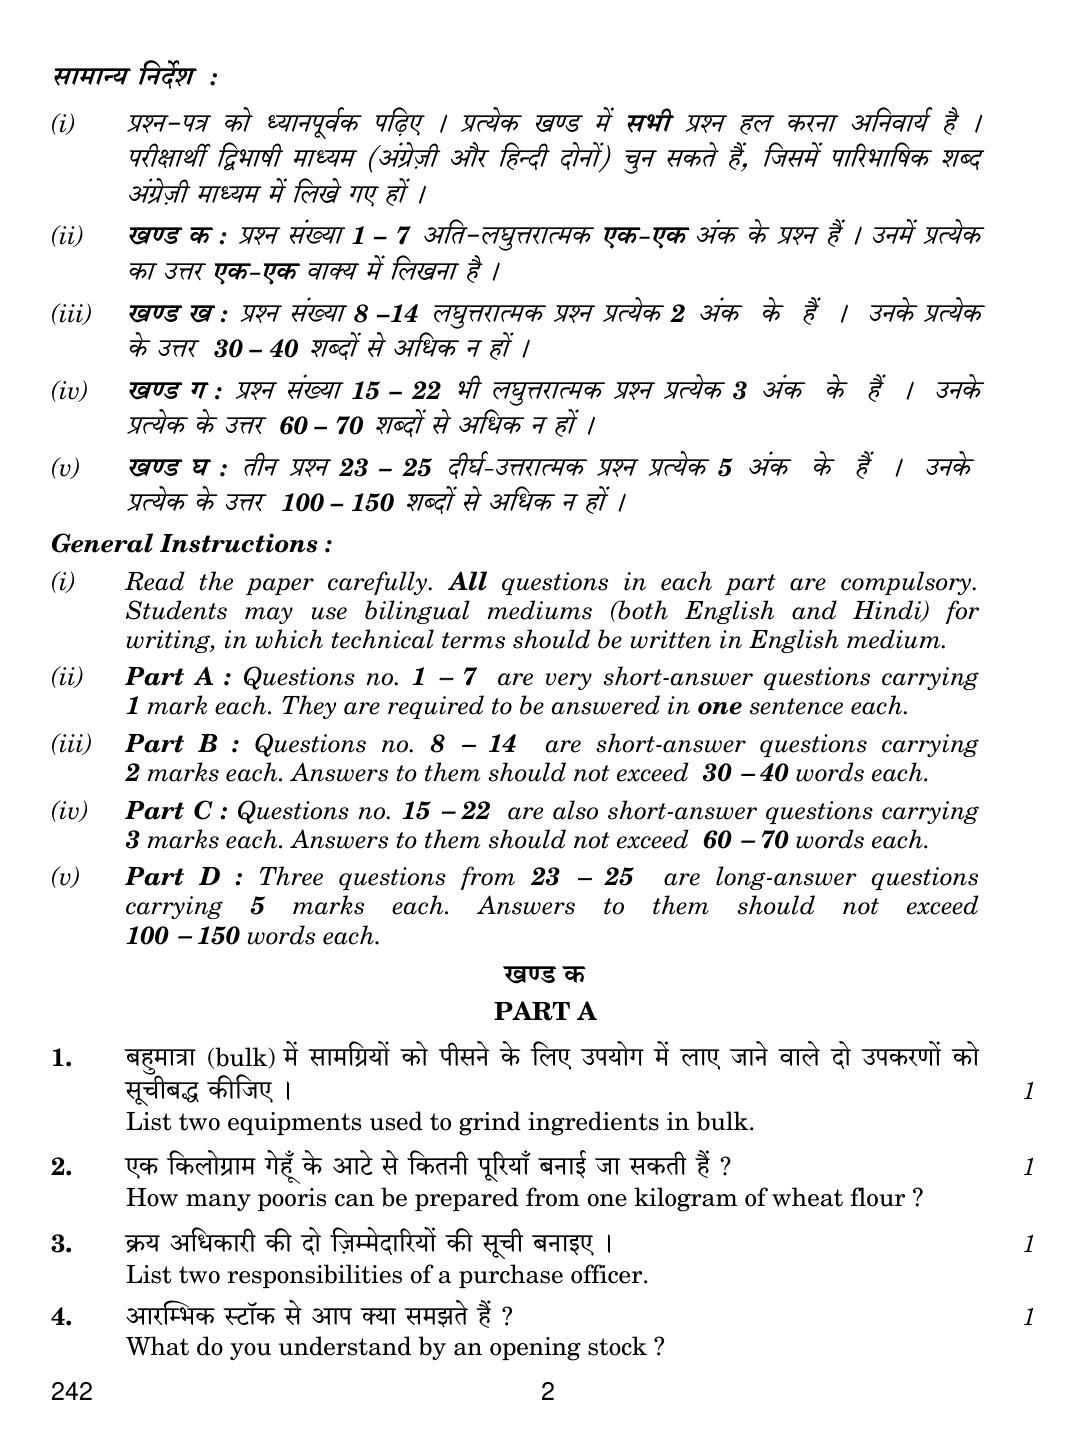 CBSE Class 12 242 FOOD PRODUCTION IV 2018 Question Paper - Page 2